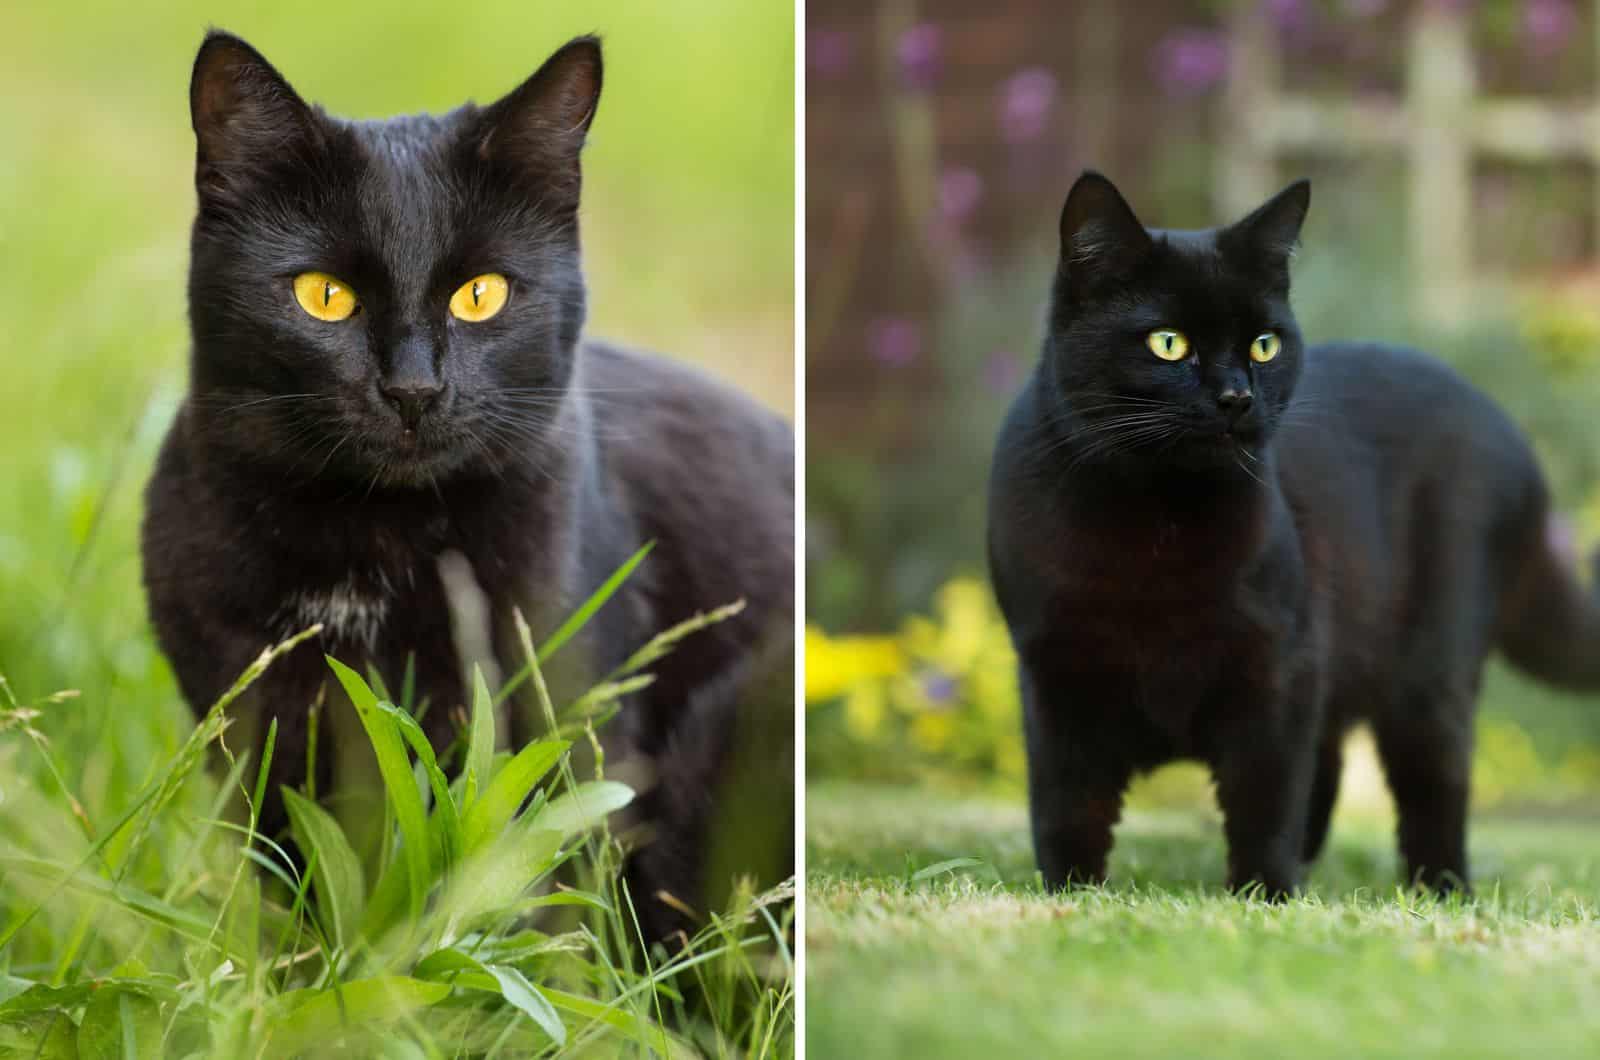 Bombay Cat and Black Cat side by side